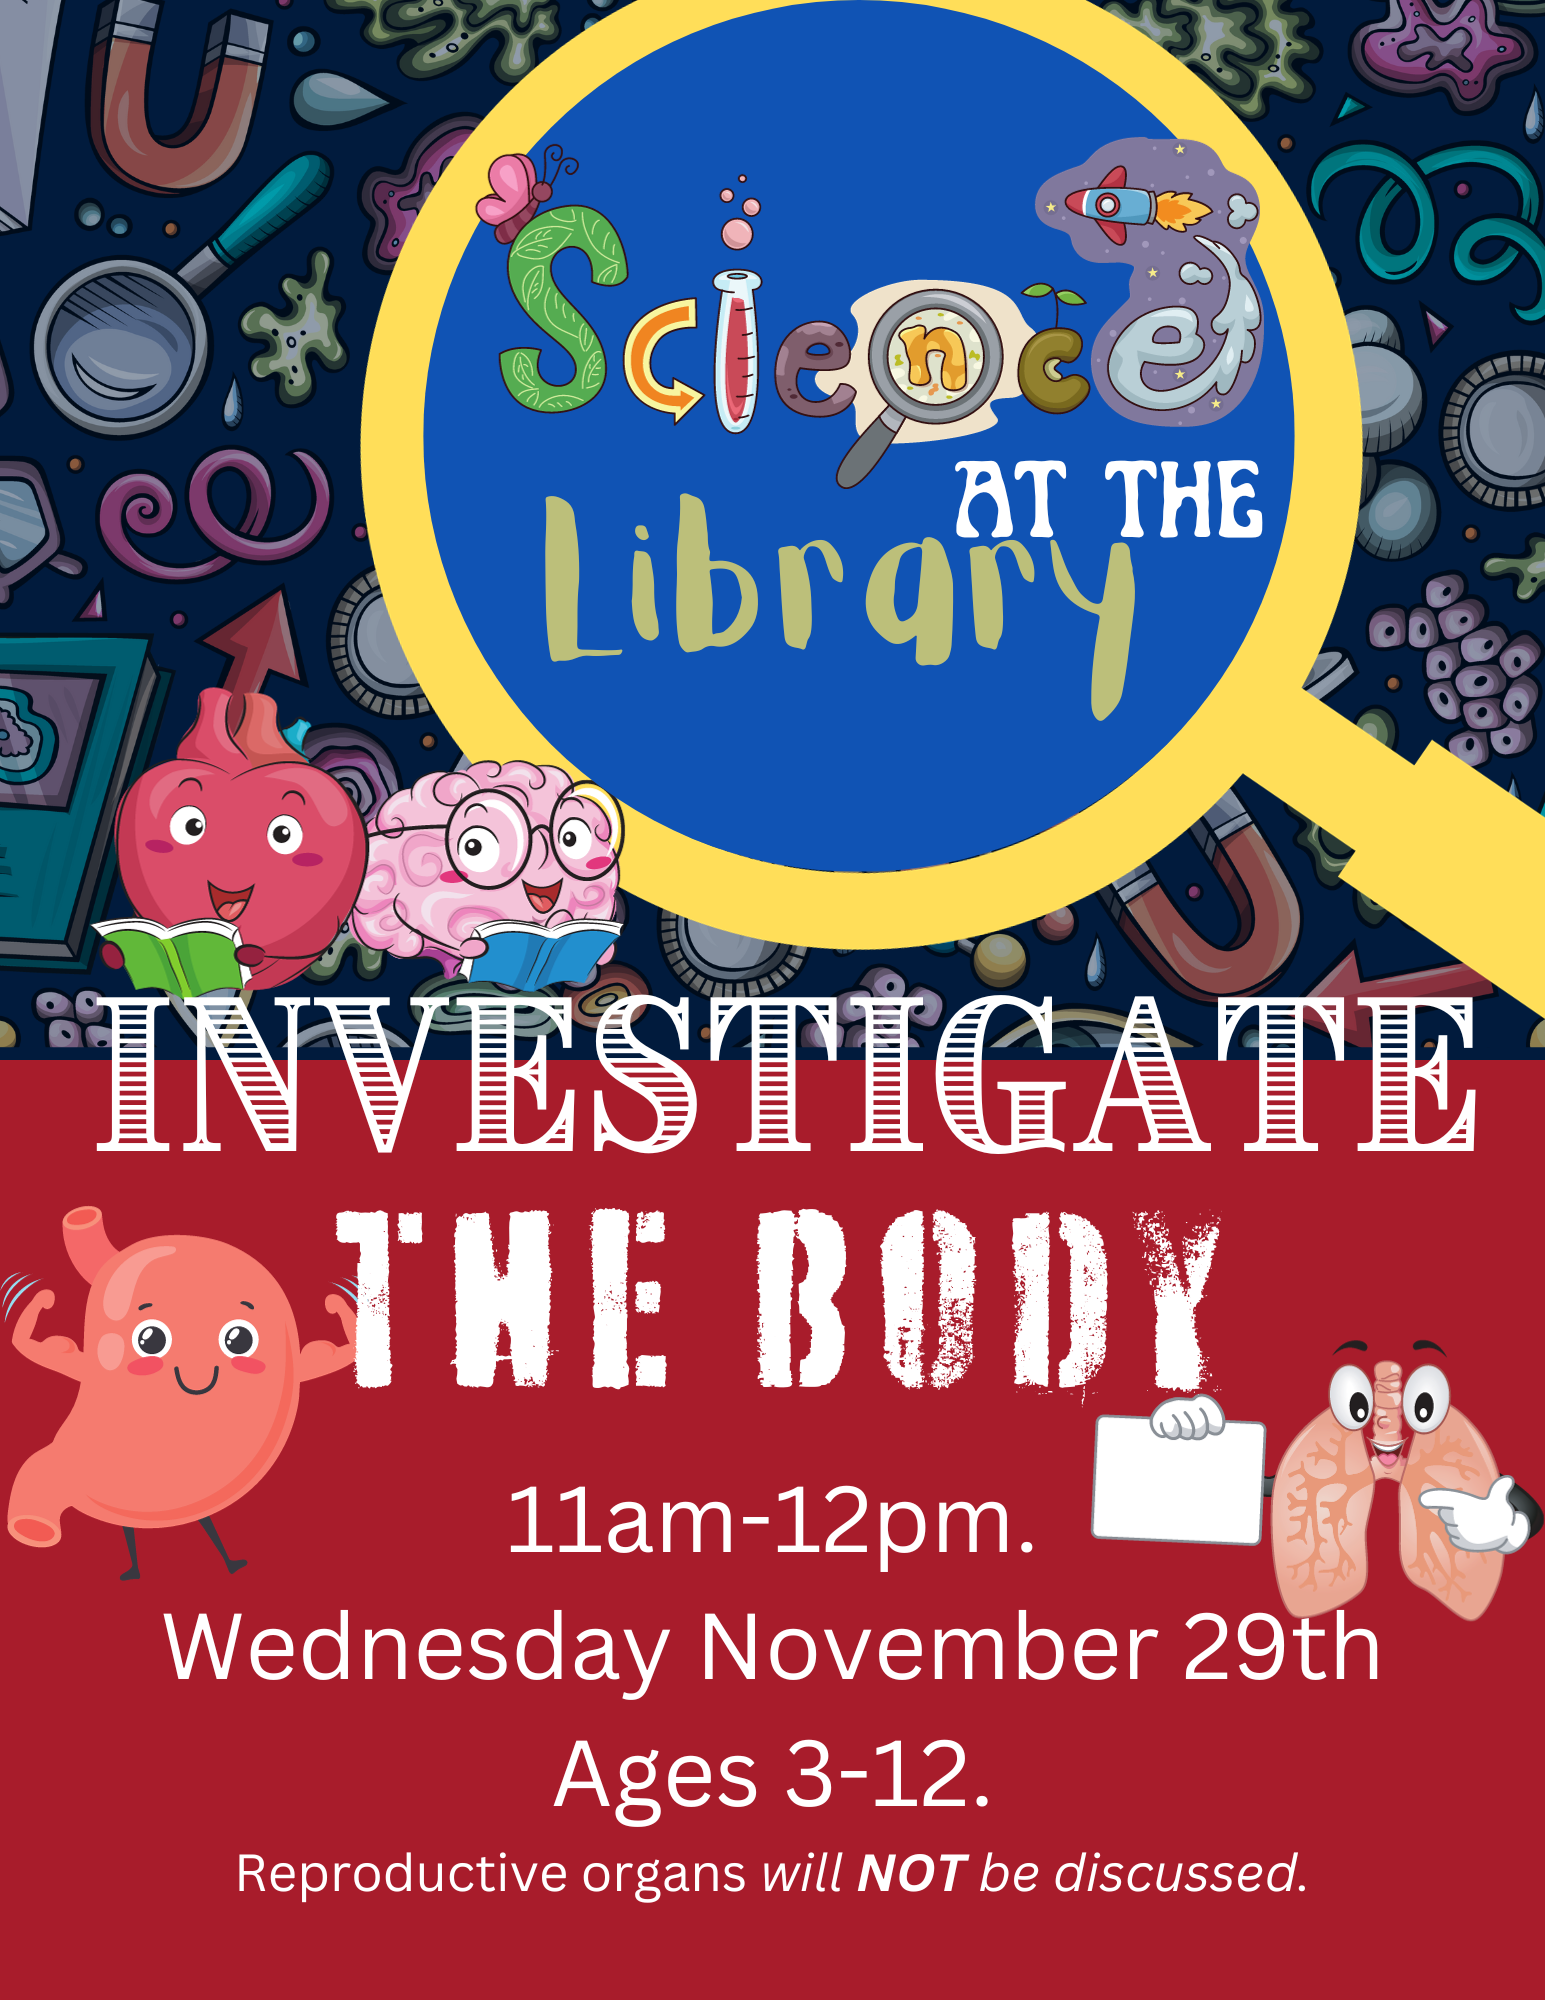 Science at the library